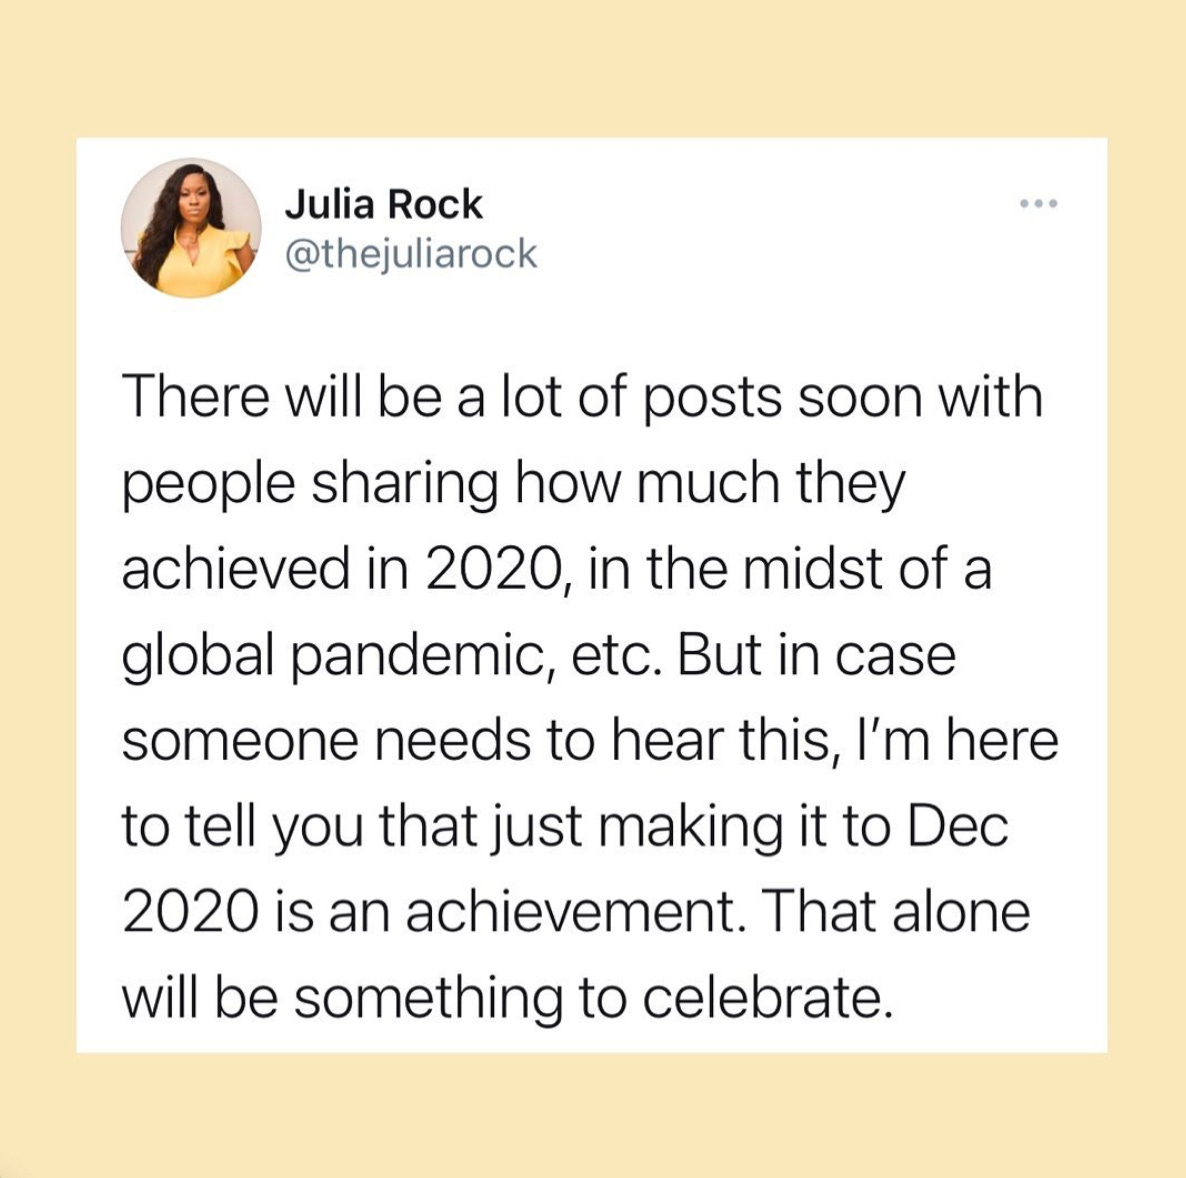 Yellow box with a tweet in the middle from Julia Rock (@thejuliarock) reading "There will be a lot of posts soon with people sharing how much they achieved in 2020, in the midst of a global pandemic, etc. But in case someone needs to hear this, I'm here to tell you that just making it to Dec 2020 is an achievement. That alone will be something to celebrate."